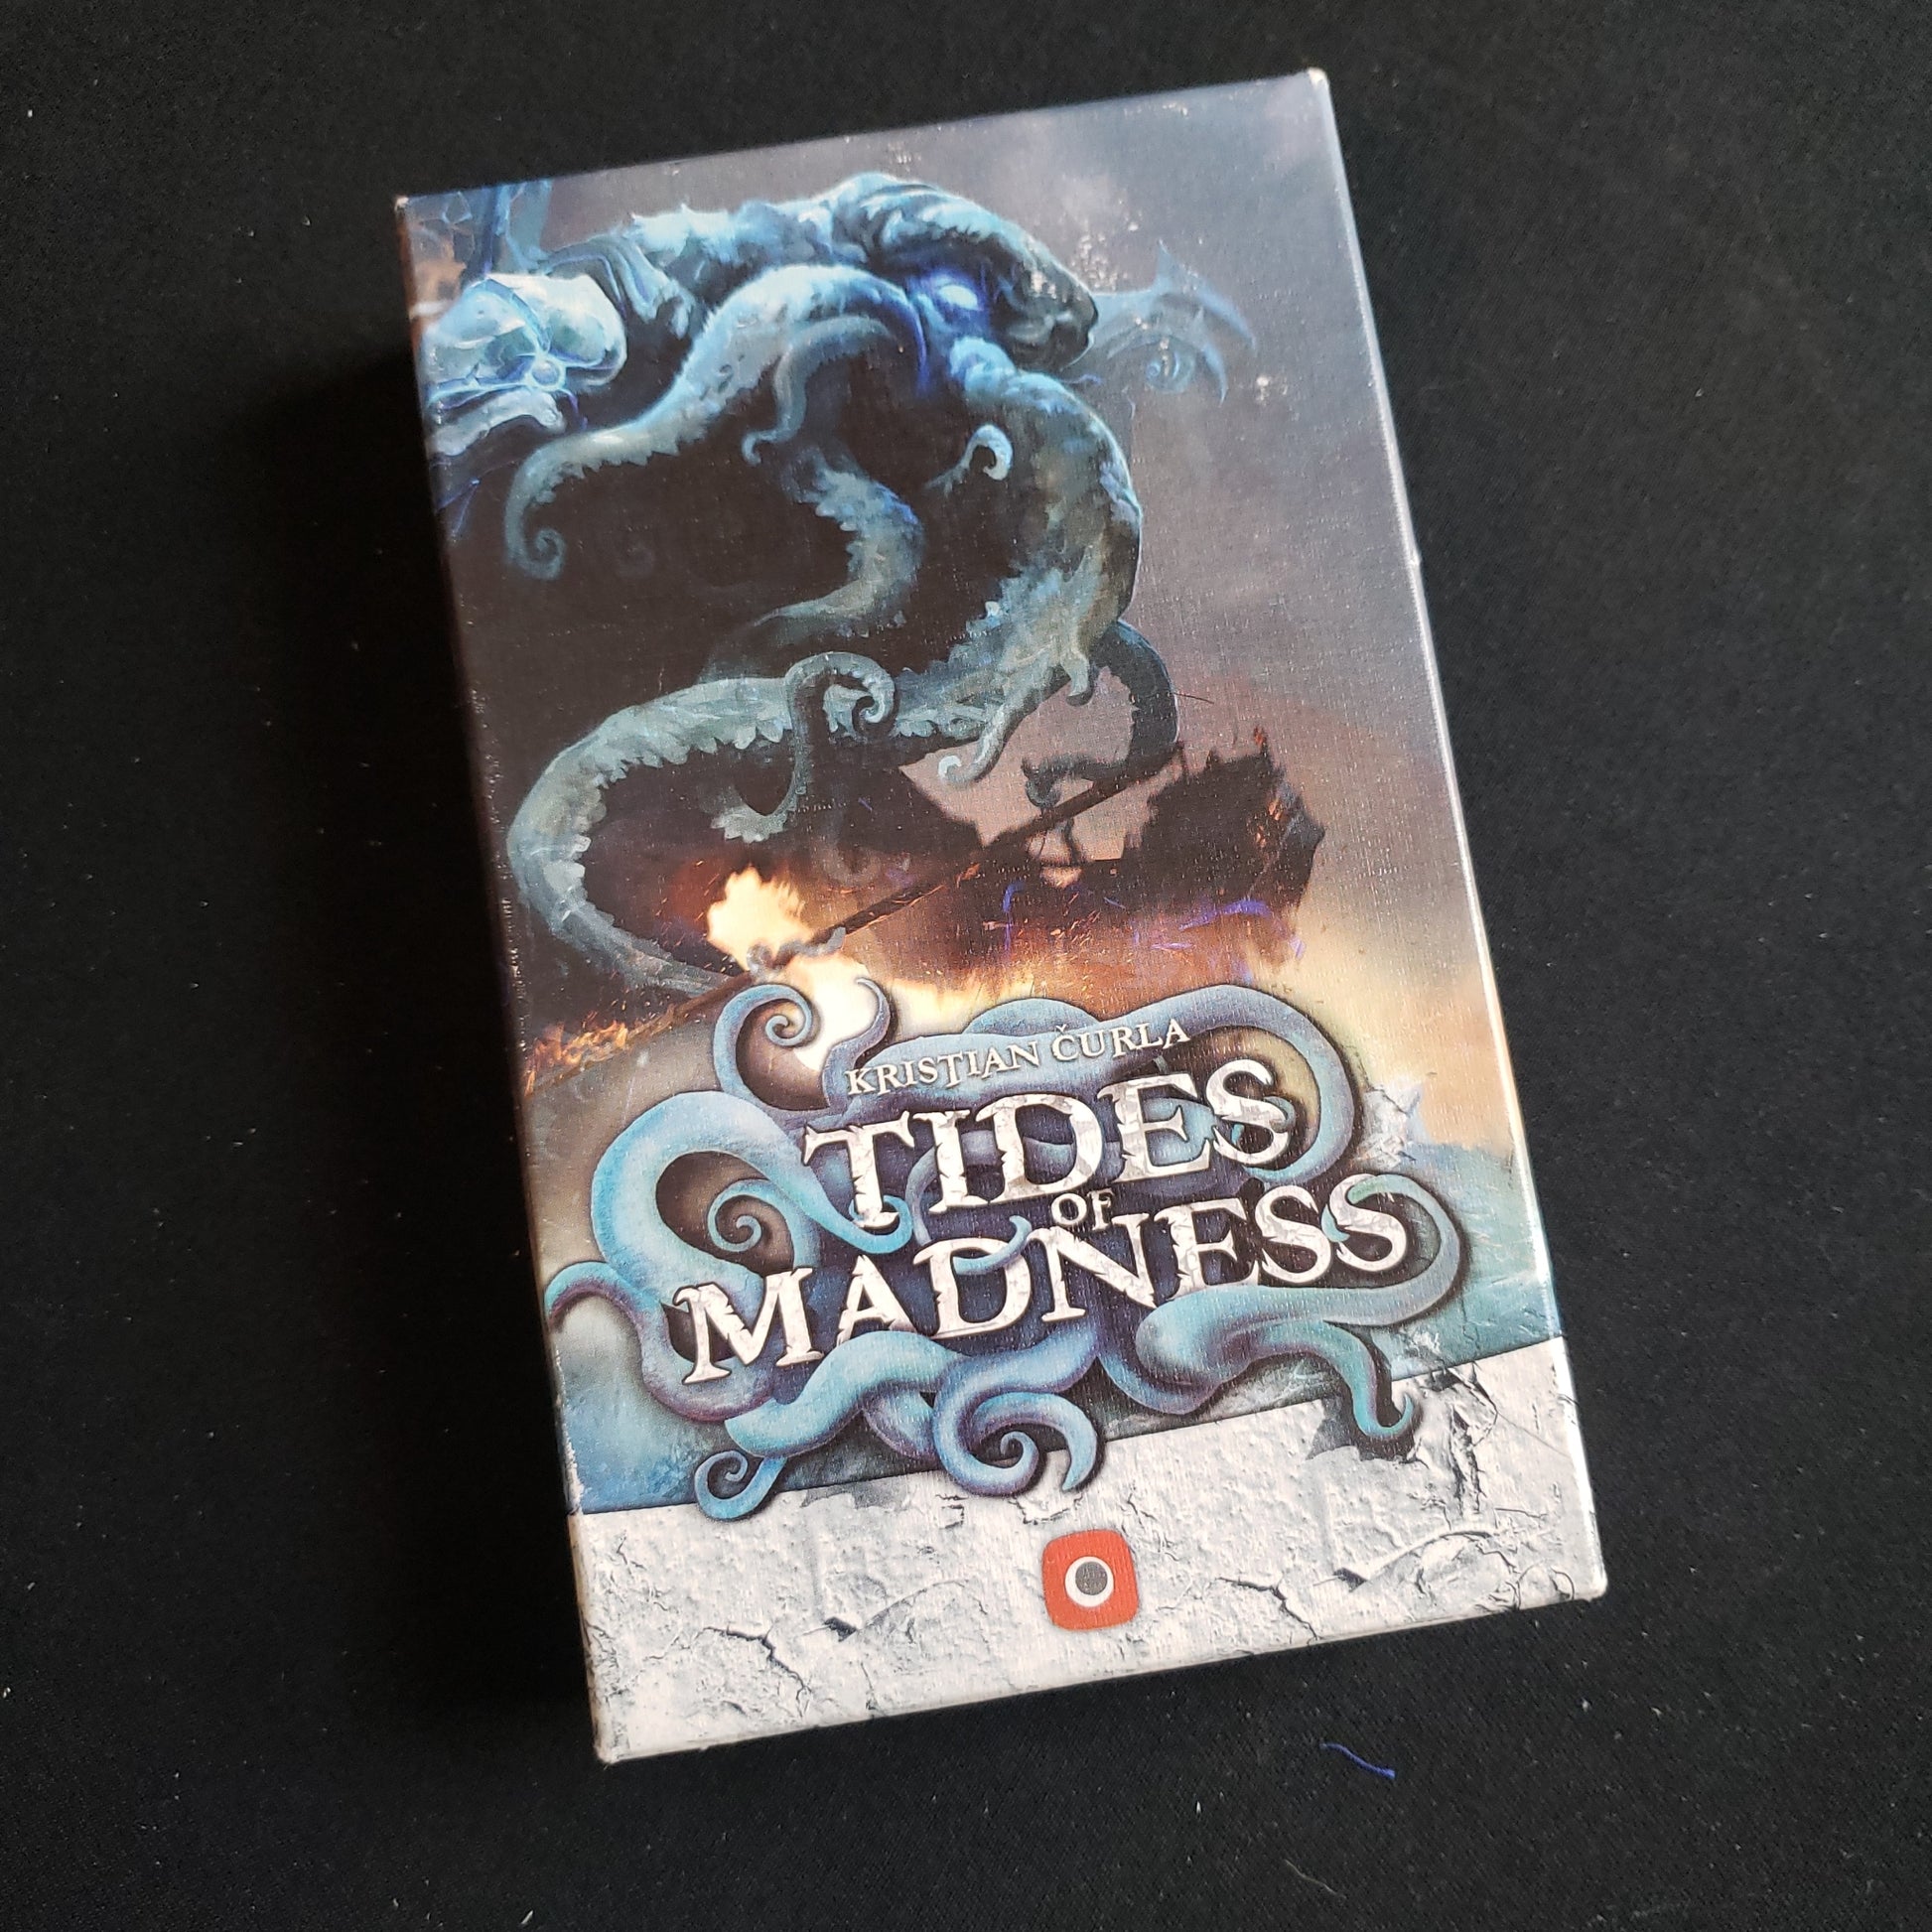 Image shows the front cover of the box of the Tides of Madness card game